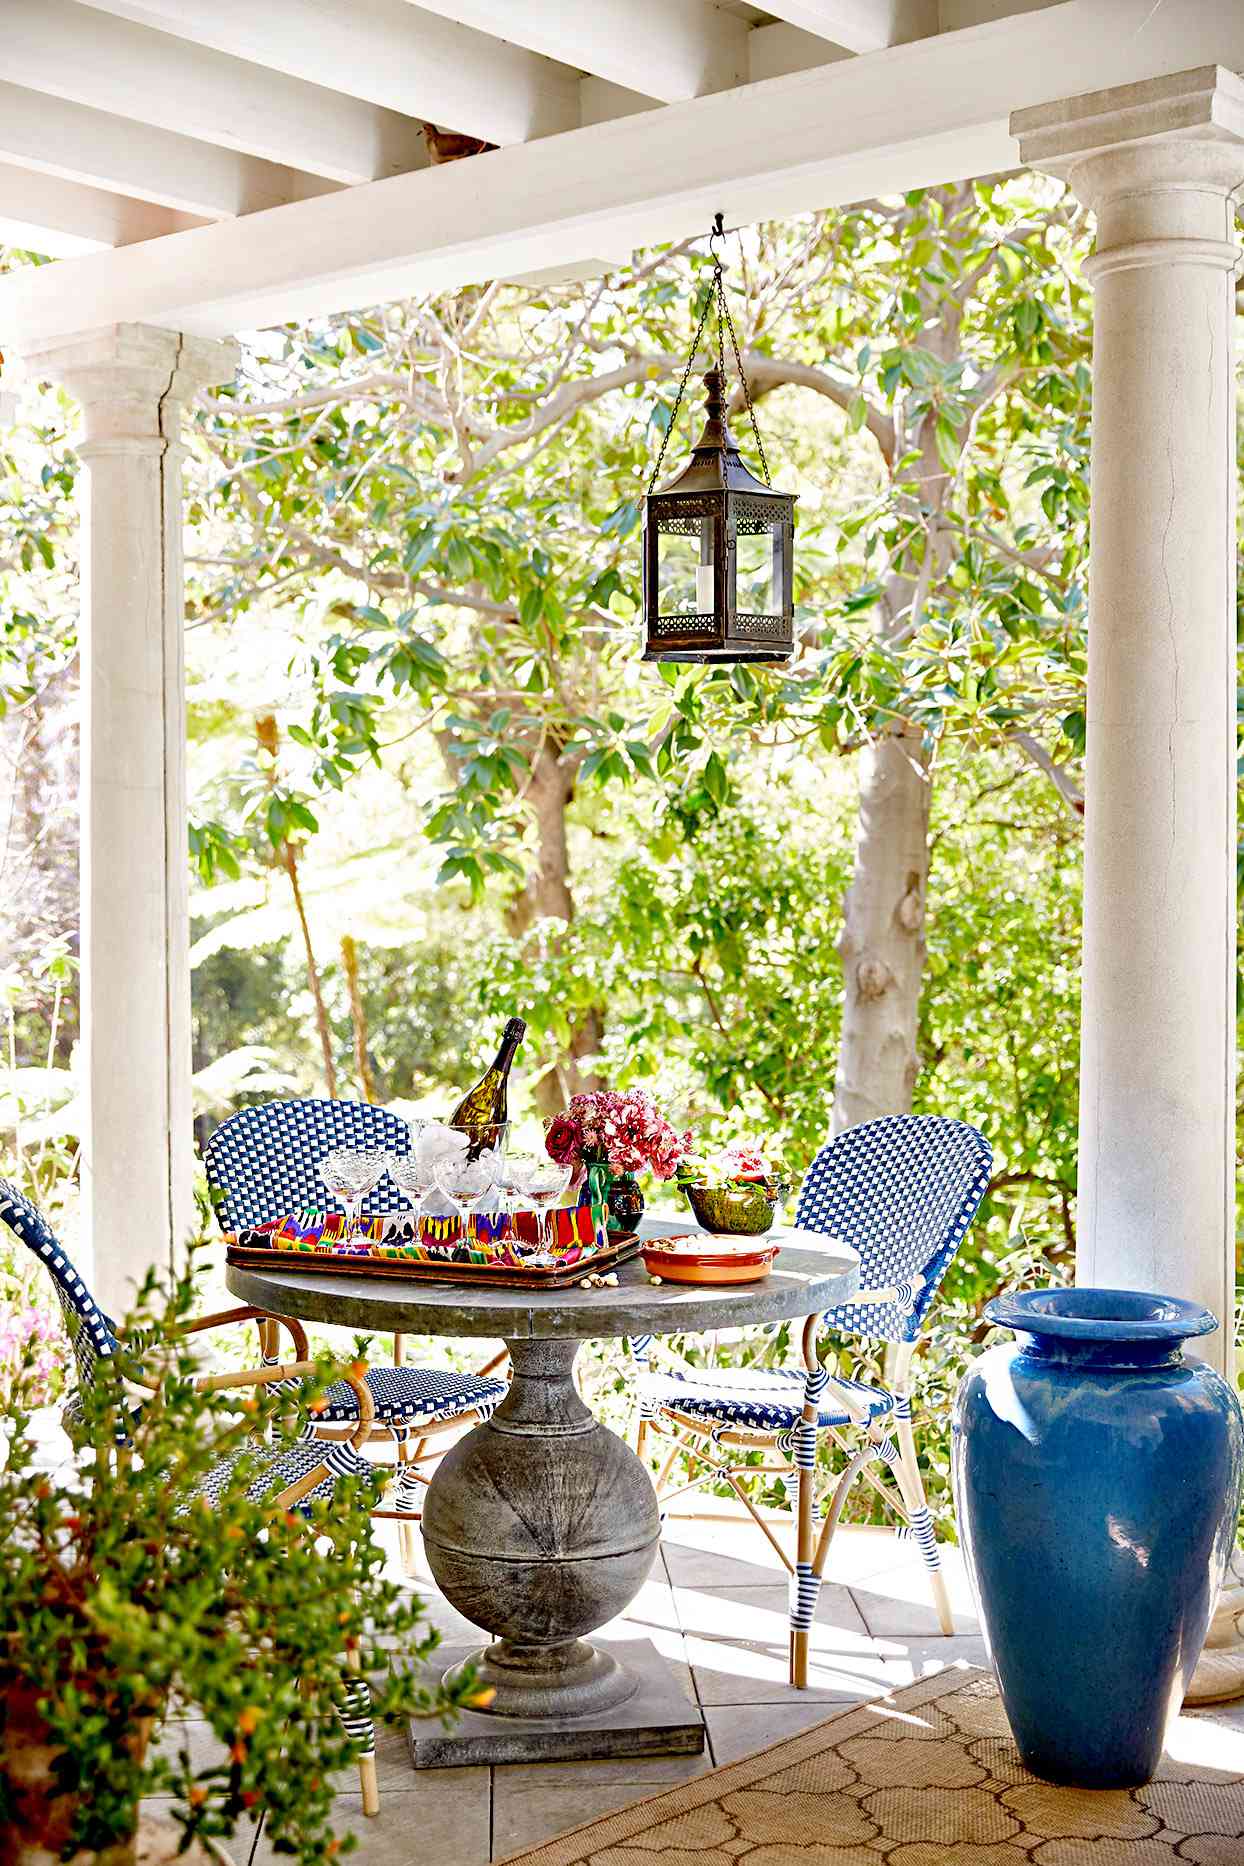 Porch with table, chairs, blue vase